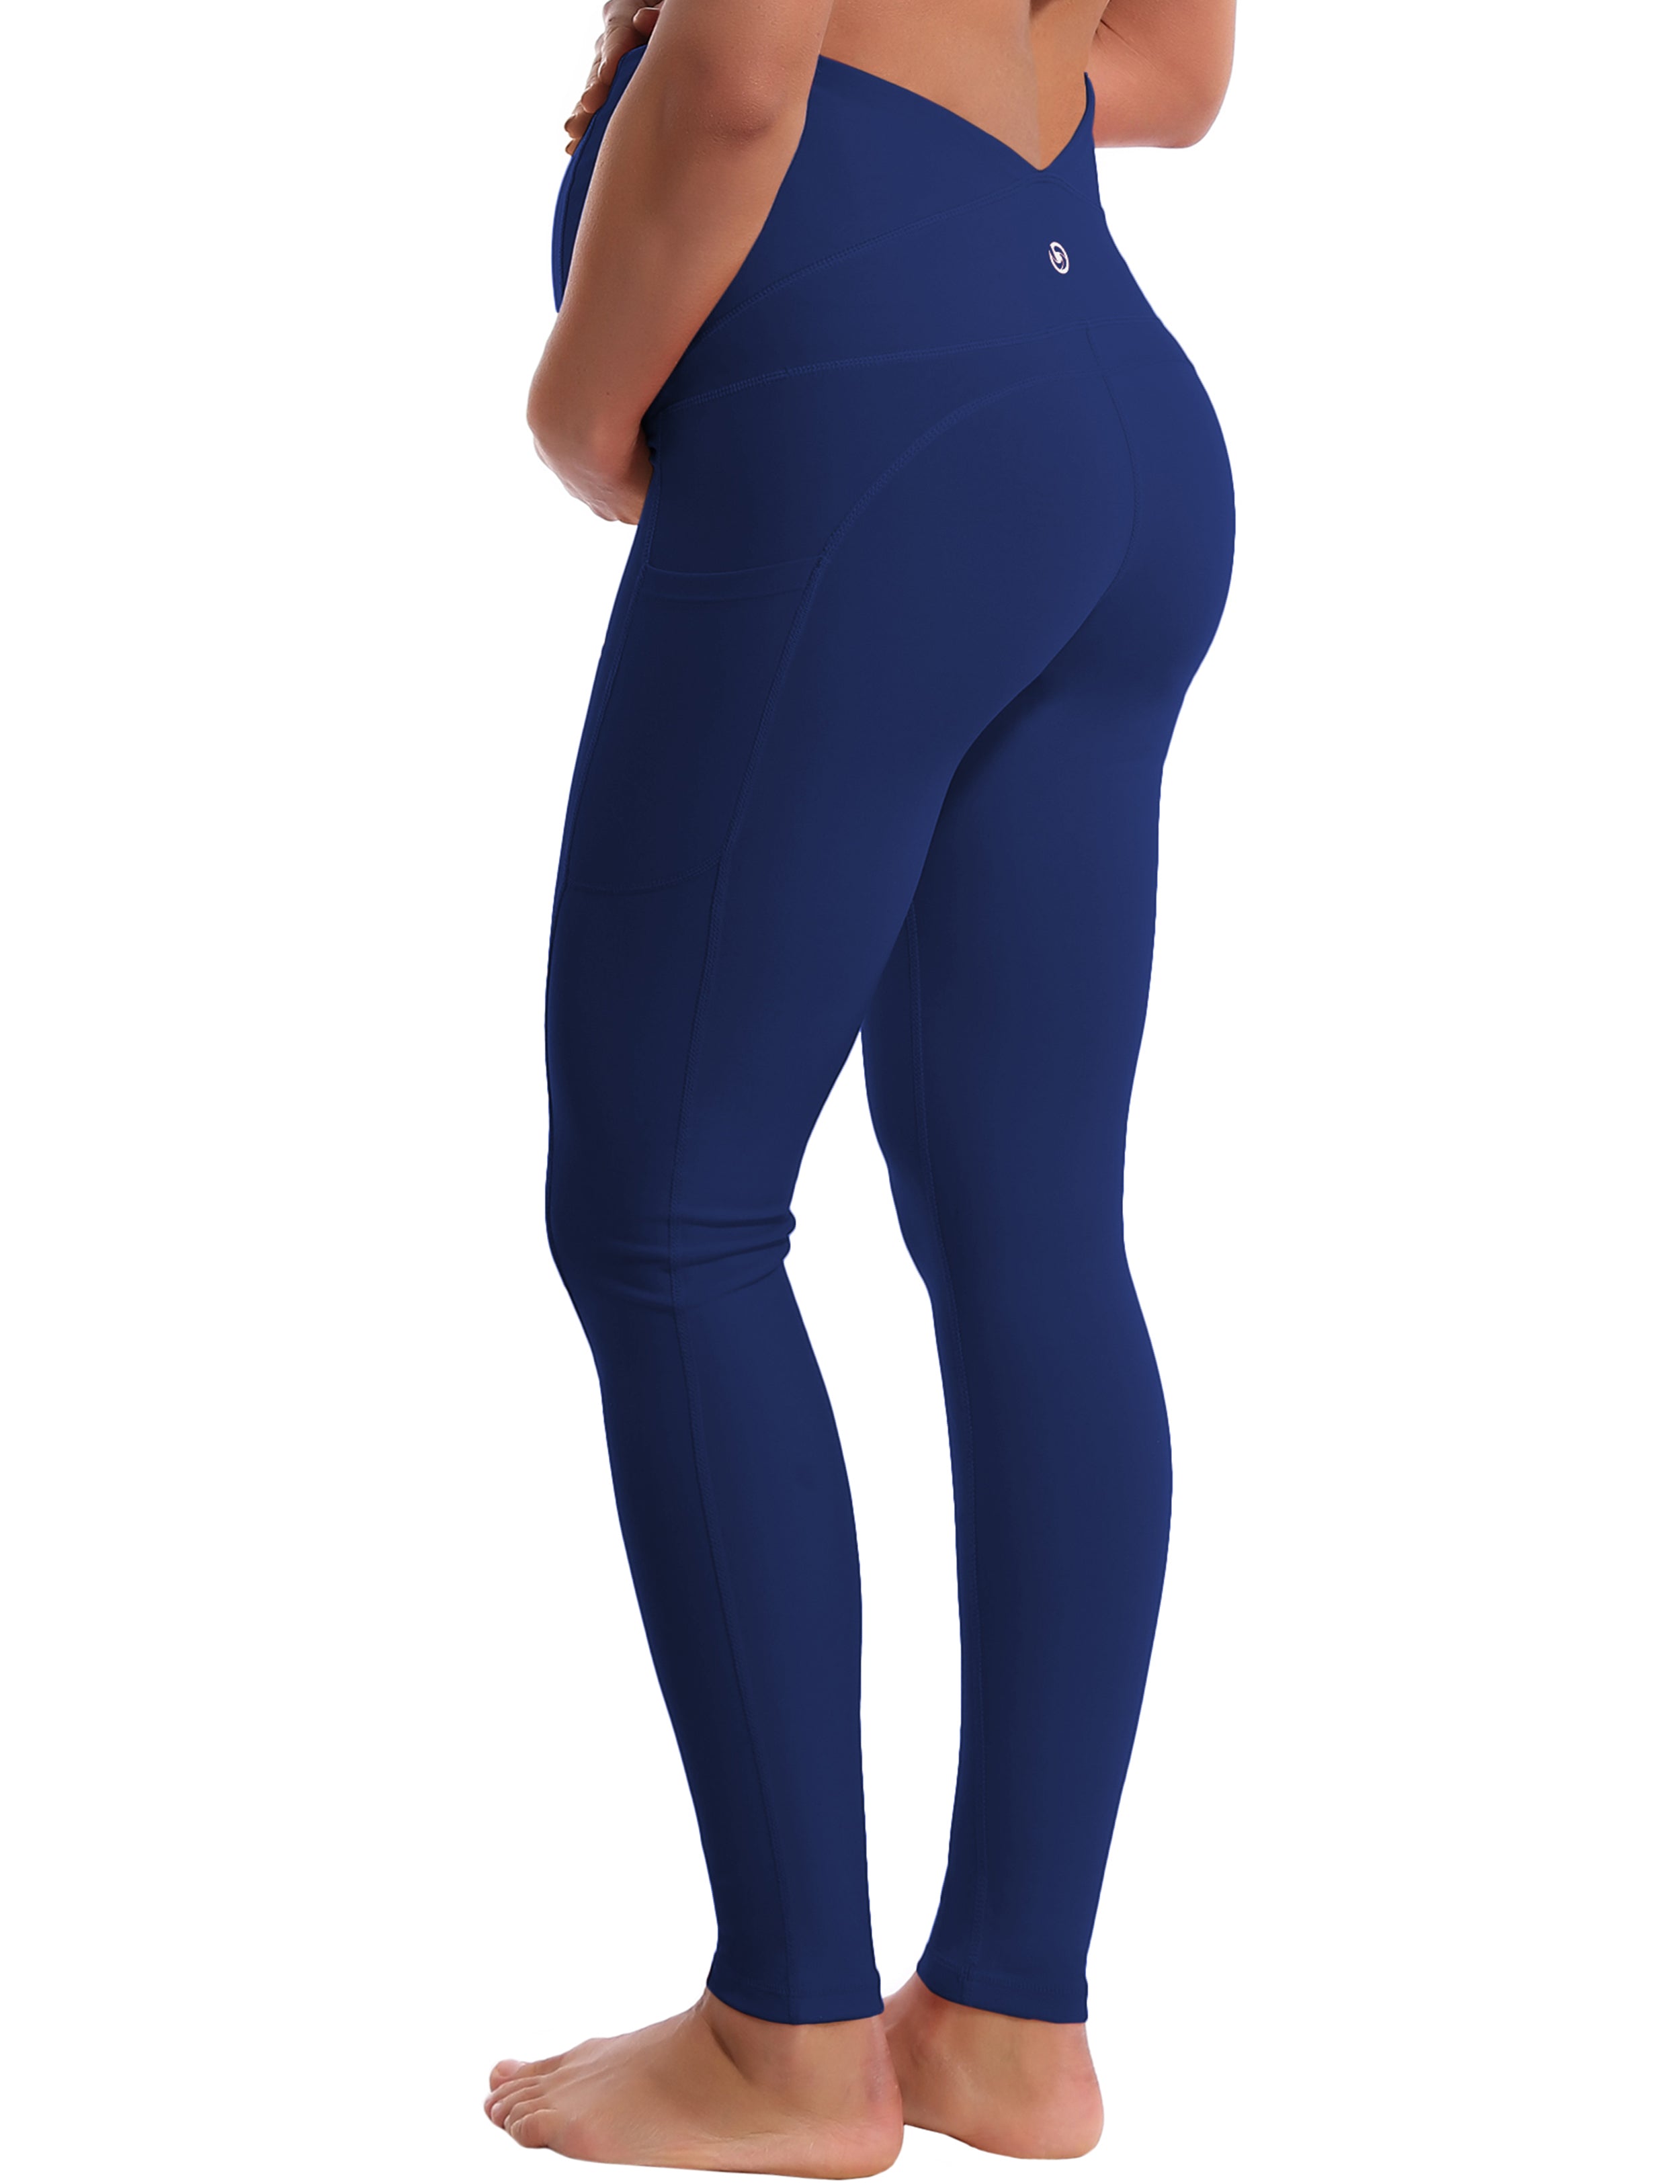 26" Side Pockets Maternity Jogging Pants navy 87%Nylon/13%Spandex Softest-ever fabric High elasticity 4-way stretch Fabric doesn't attract lint easily No see-through Moisture-wicking Machine wash